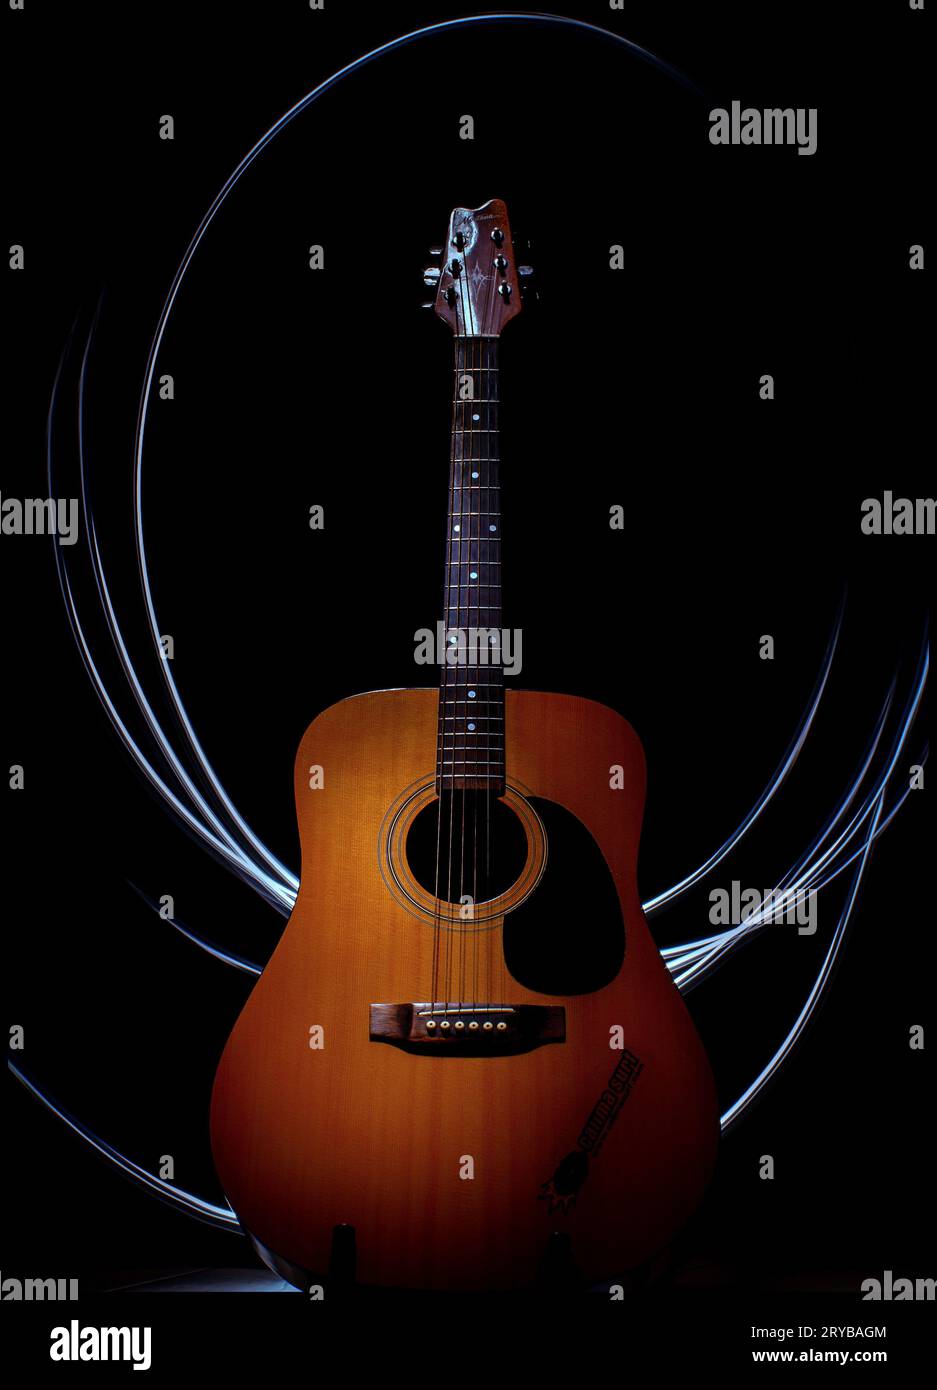 Acoustic guitar with light beams behind it on a black background Stock Photo